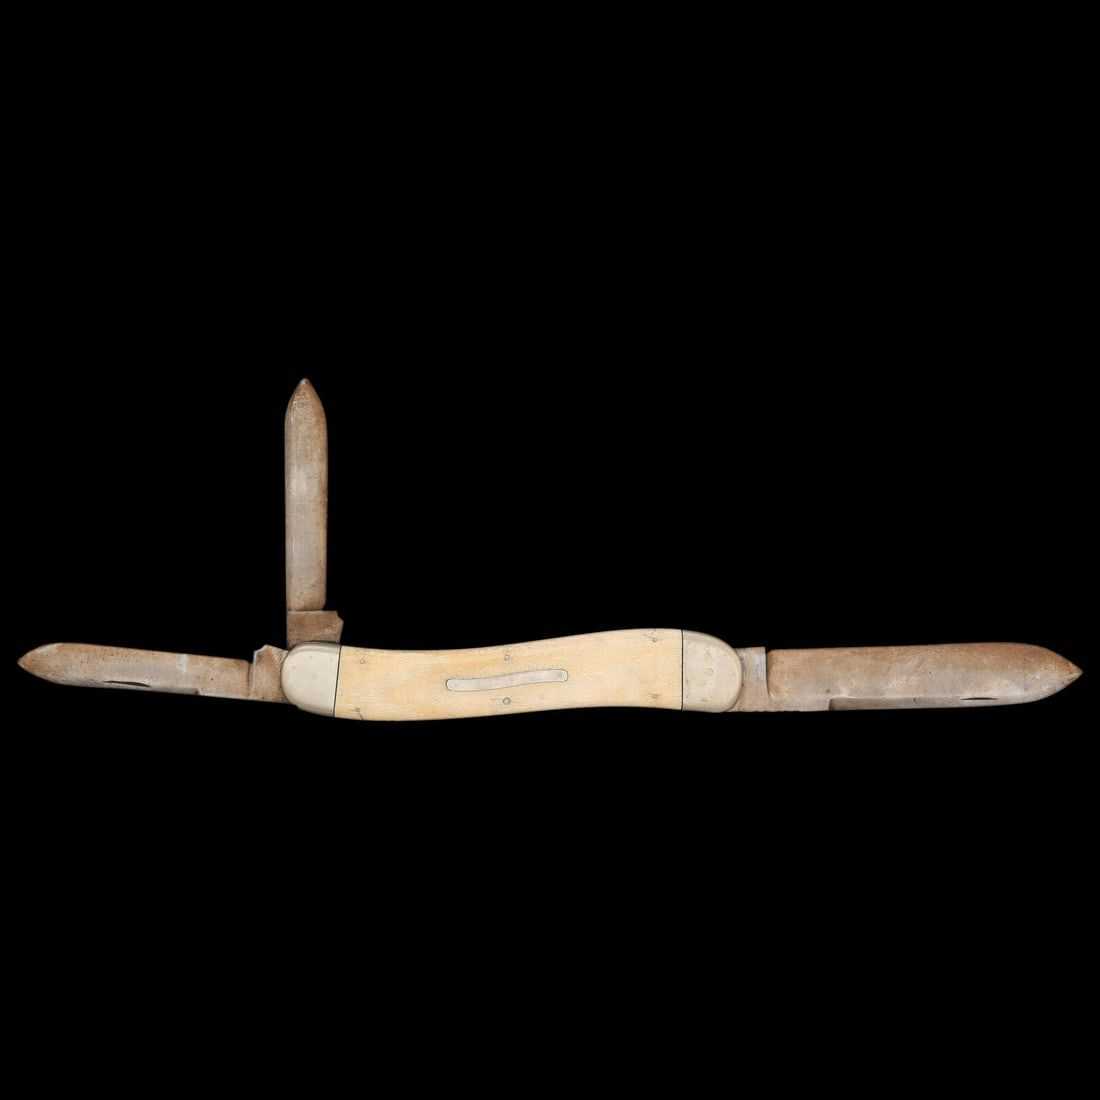 Coquanoc Works three-bladed folding knife, possibly made for the 1876 Centennial Exposition in Philadelphia, estimated at $5,000-$8,000 at Freeman’s Hindman on May 1.